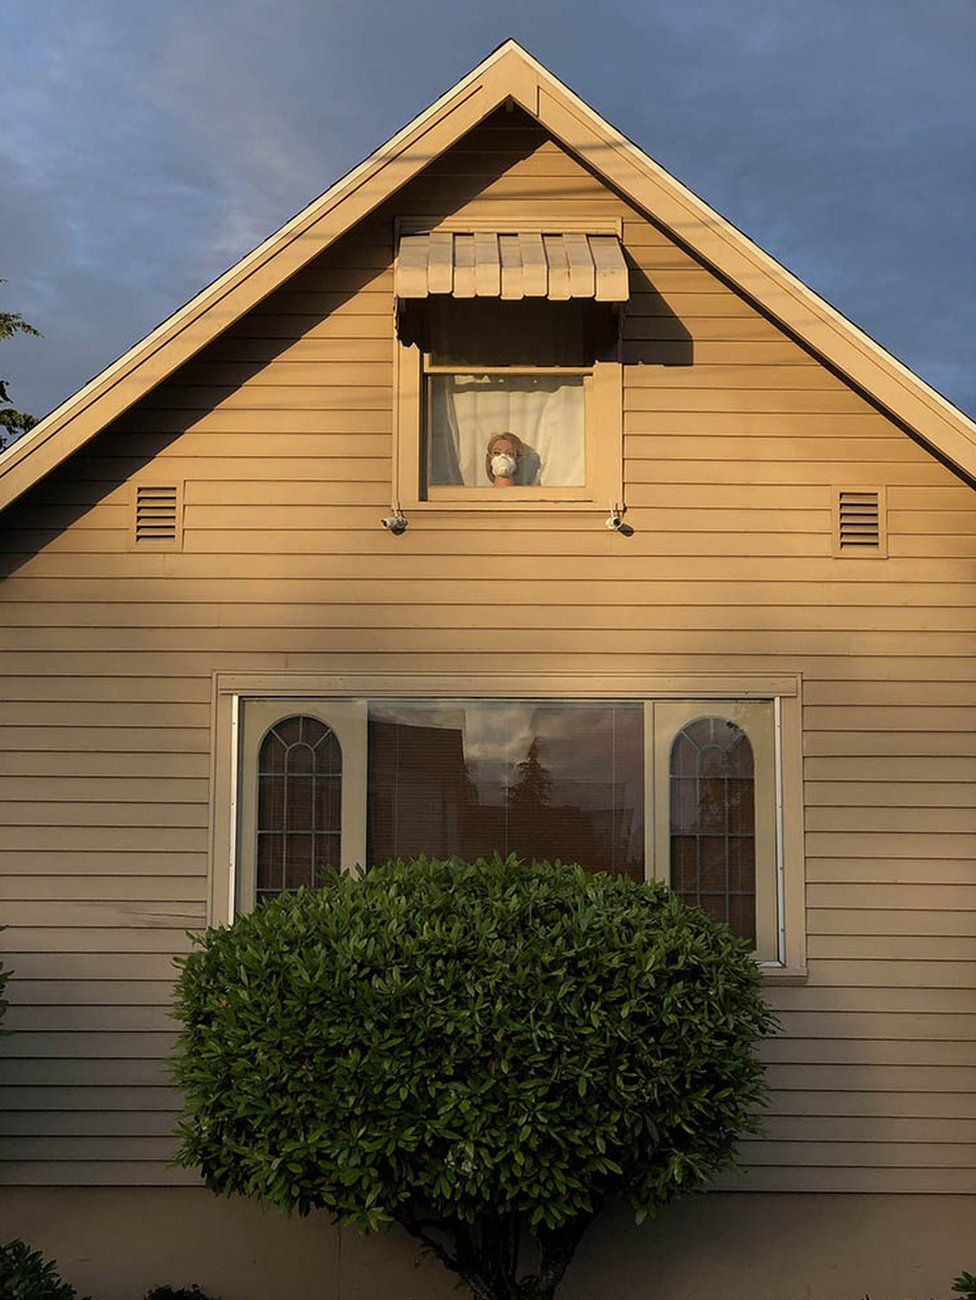 Exterior of a house with a mannequin head wearing a mask visible through a window